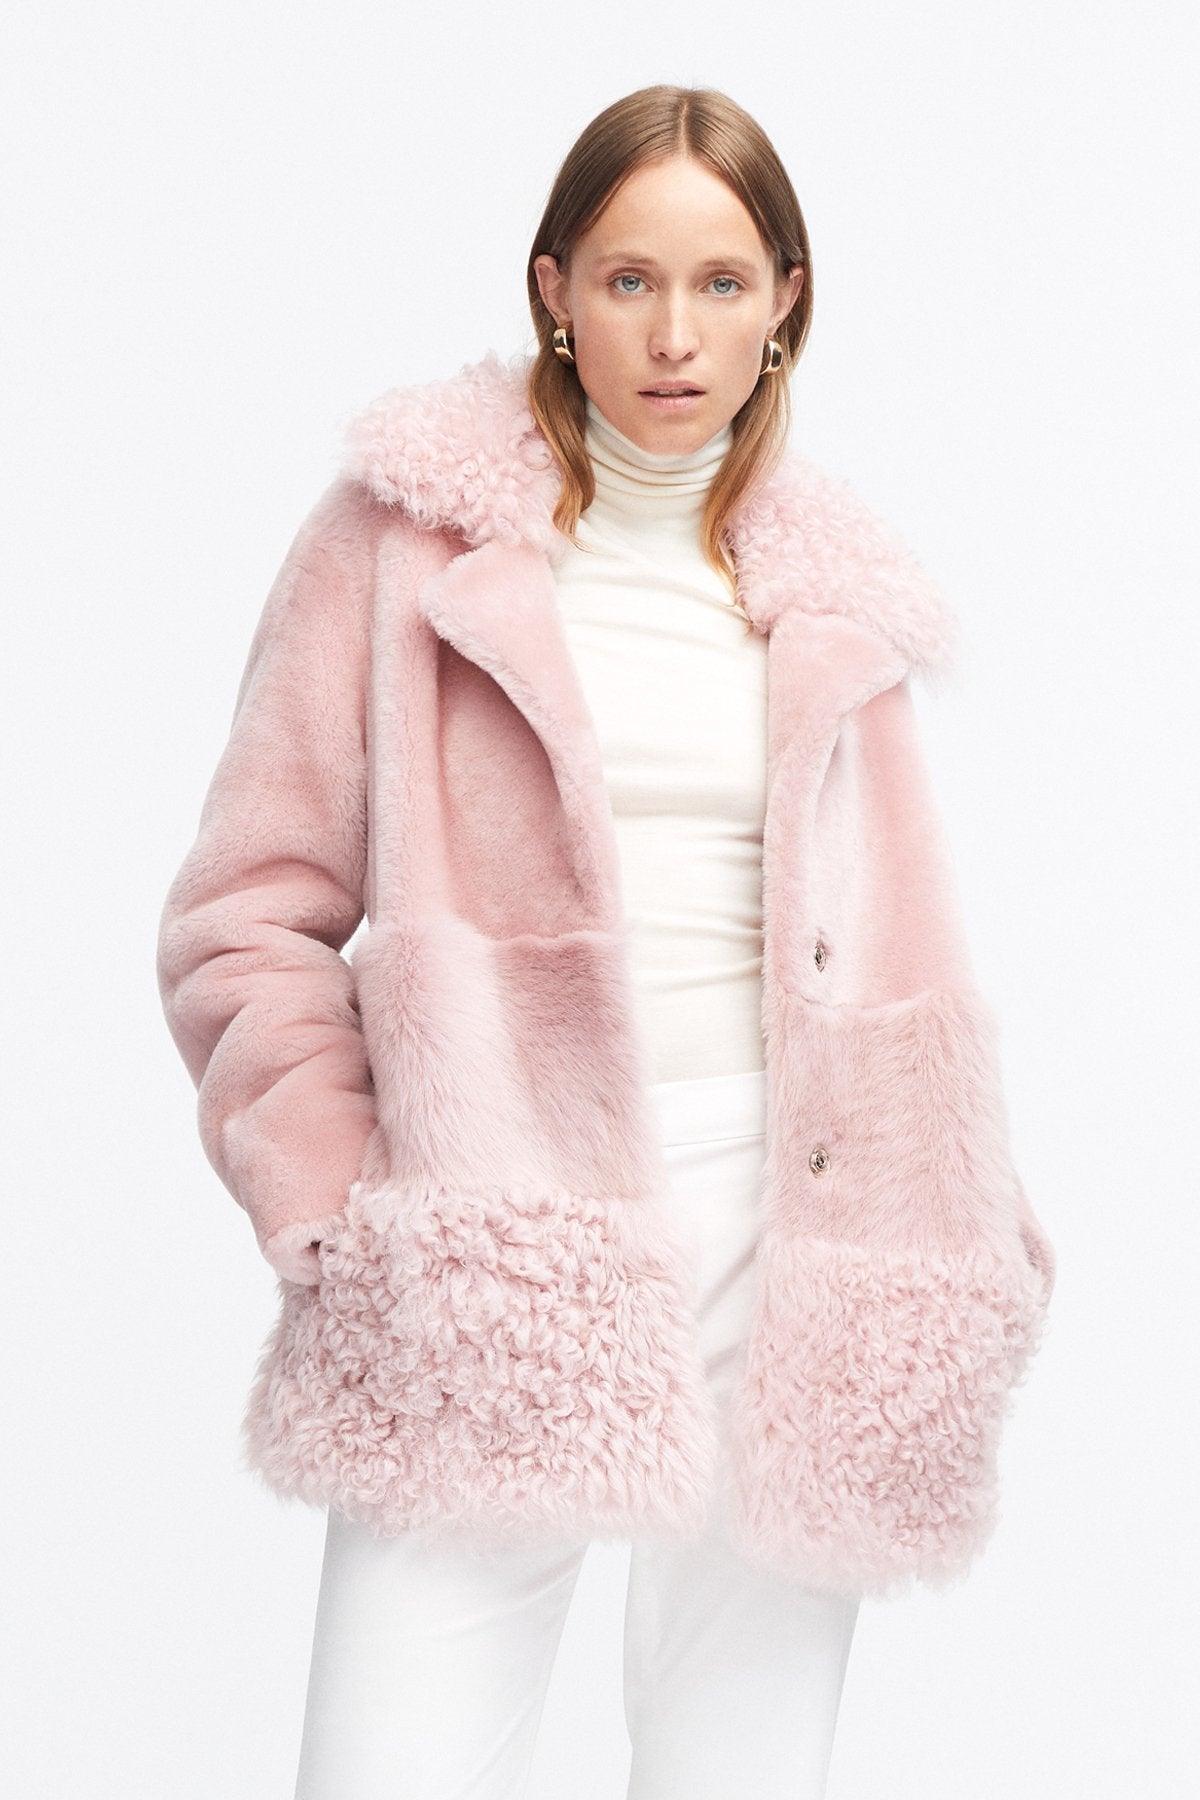 Model is wearing the Anouk Dusty Pink Luxurious Shearling Coat Close Up